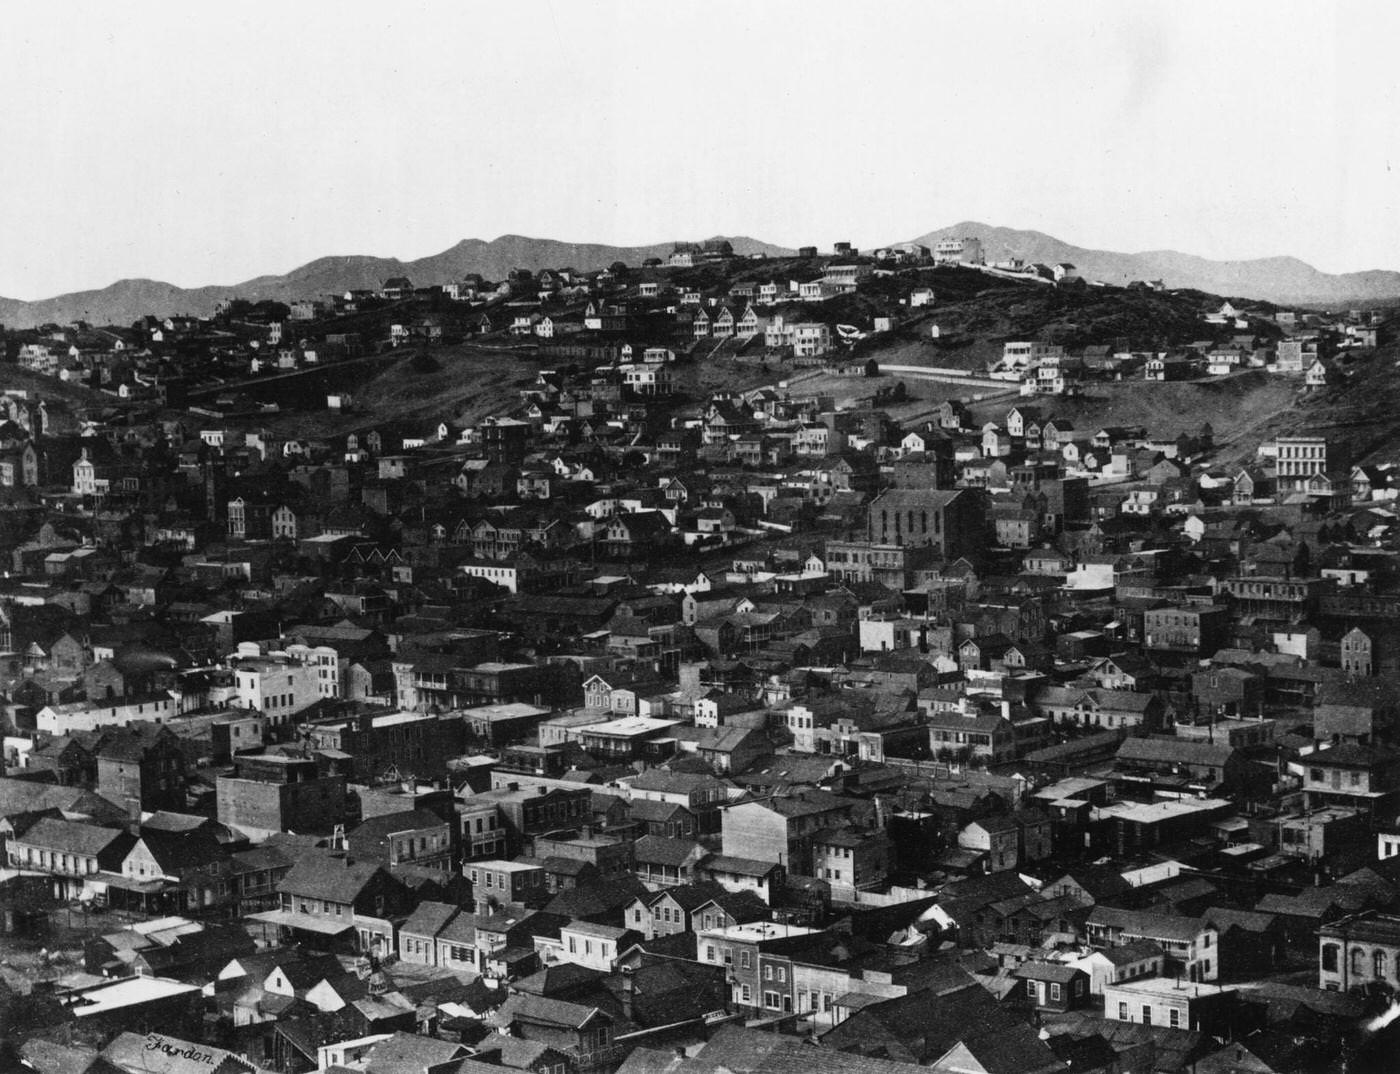 A view of a neighborhood on a hill in San Francisco, 1855